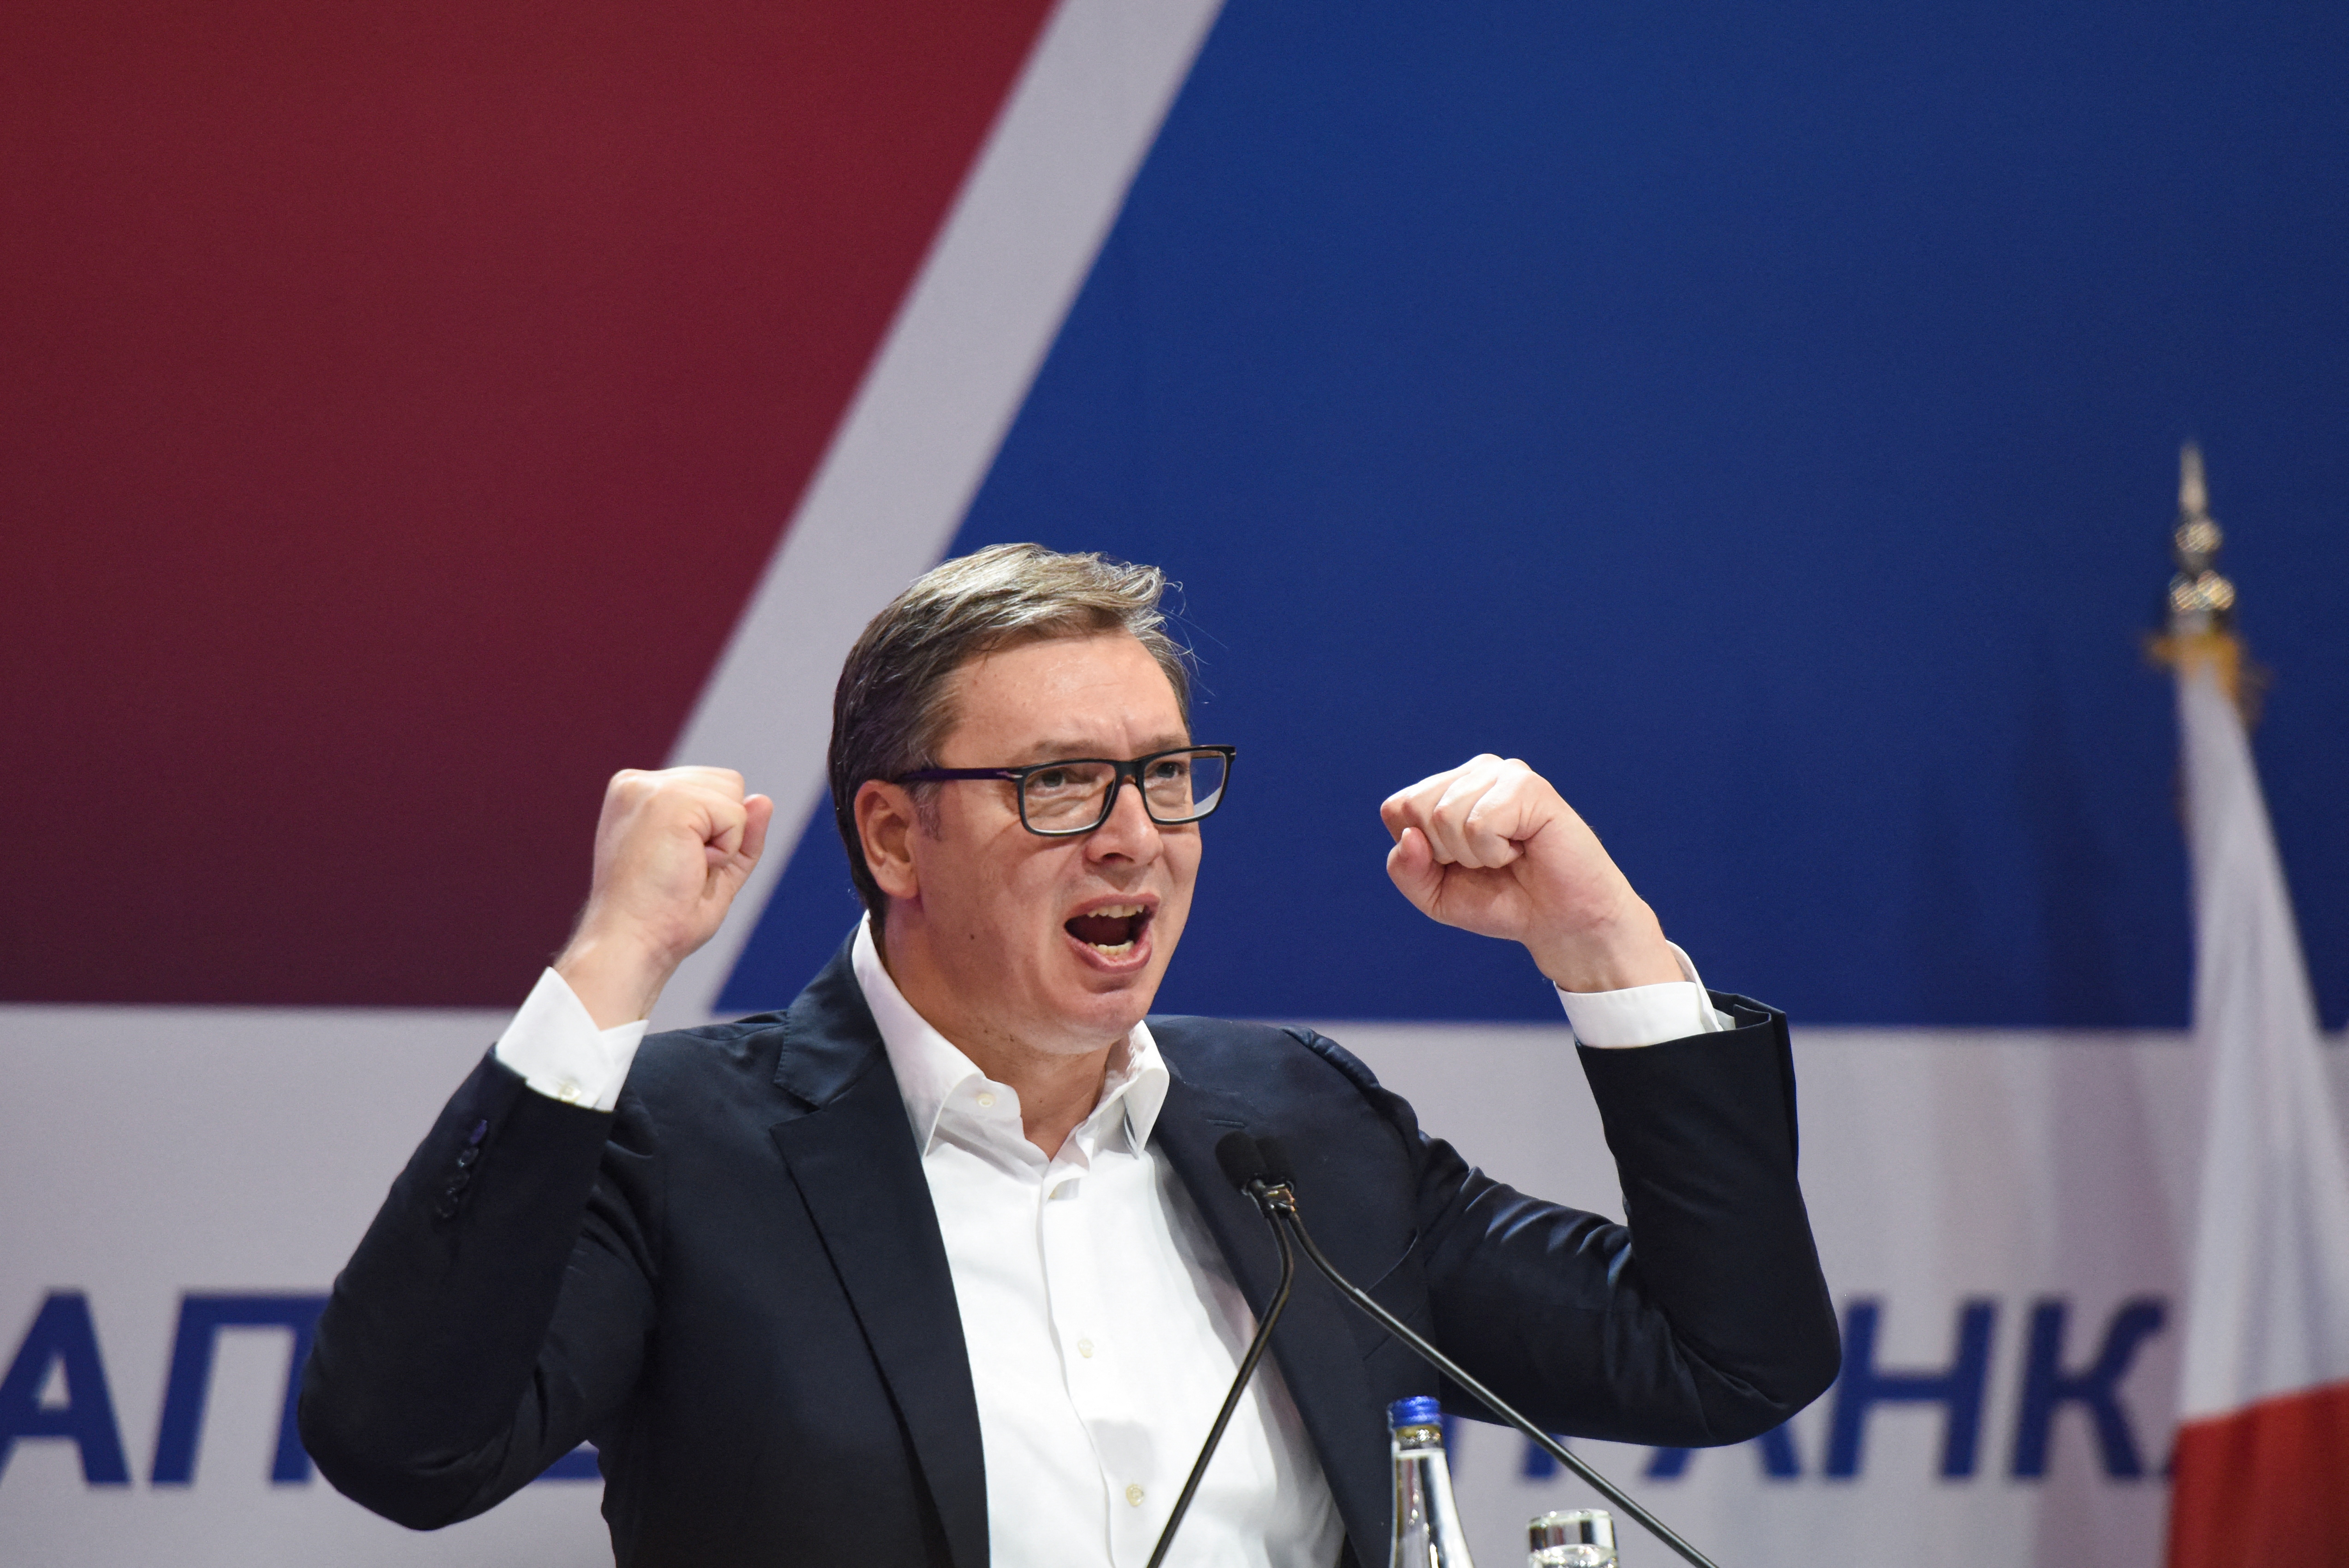 Aleksandar Vucic, the presidential candidate of the ruling SNS party, reacts during a rally in Belgrade